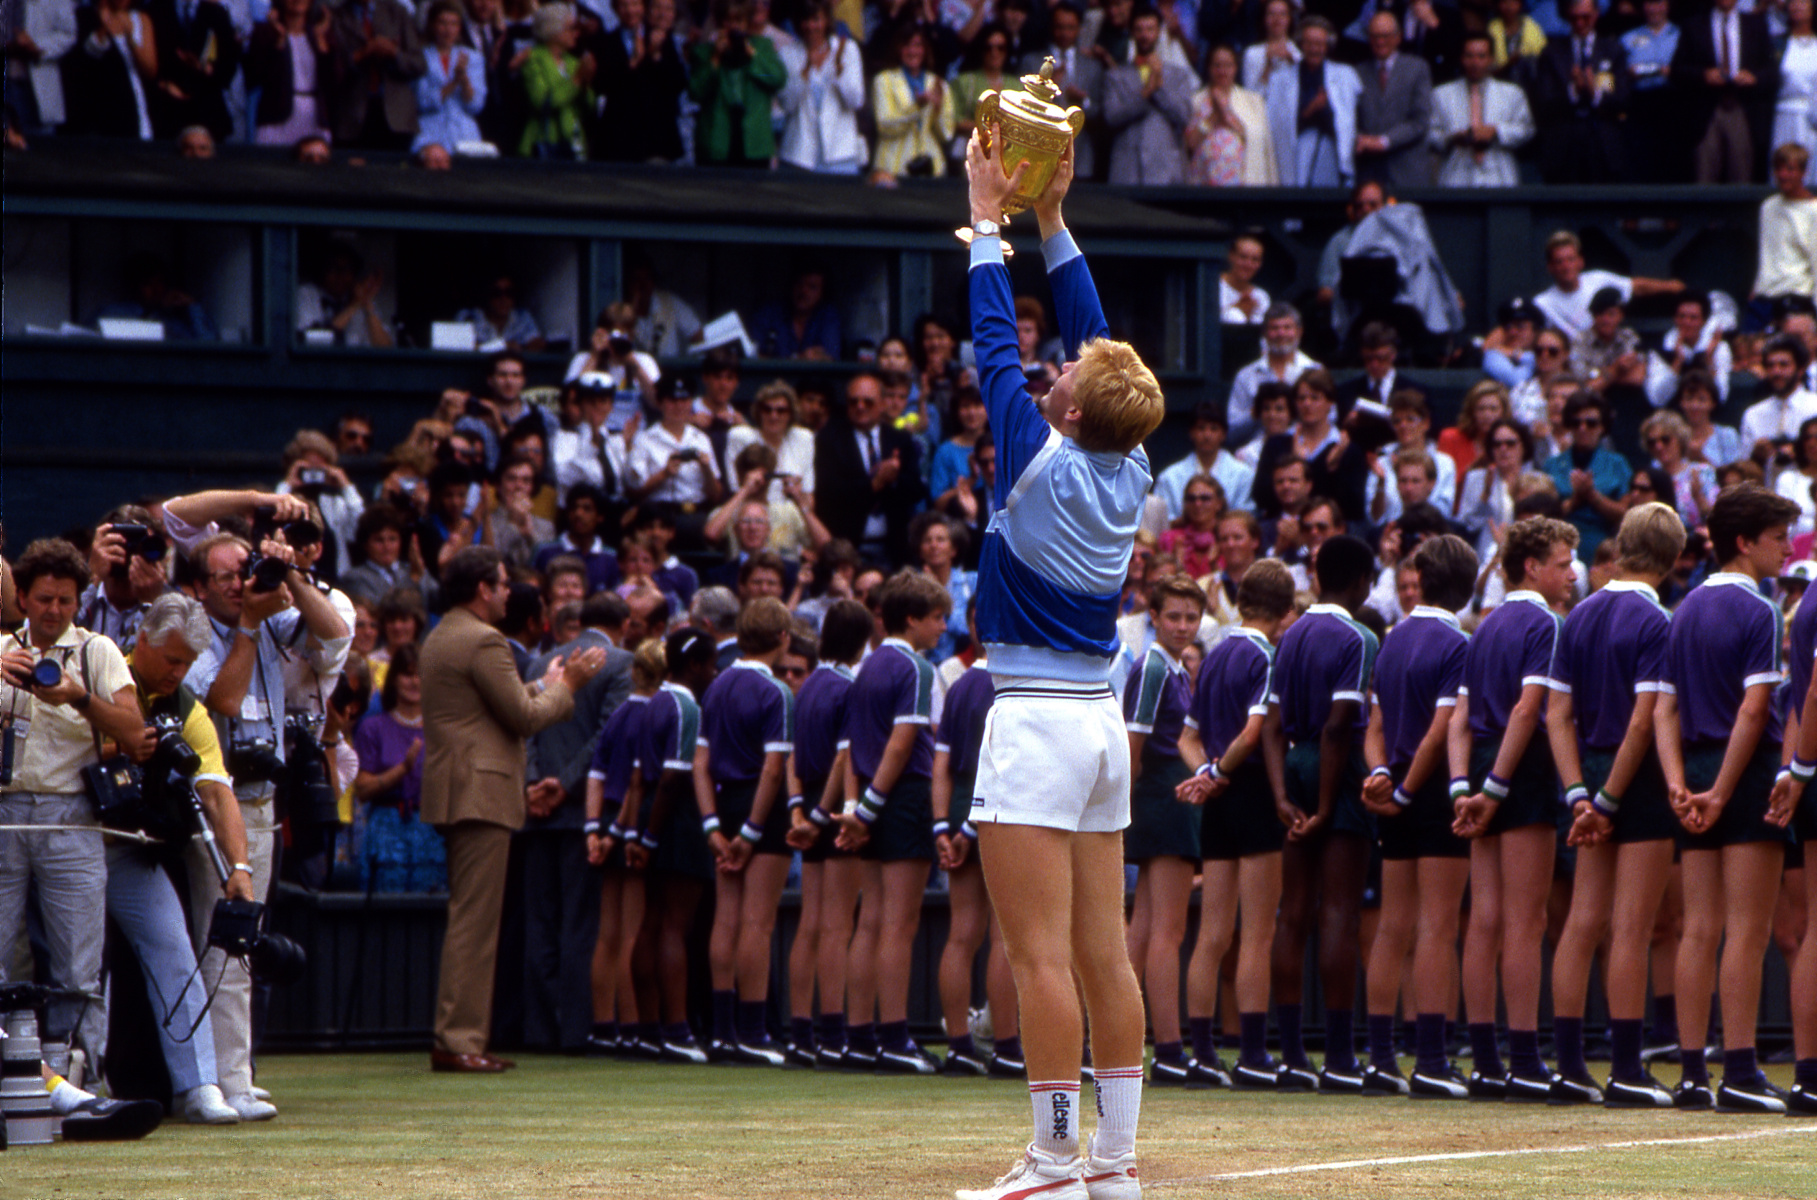 Boris Becker
Wimbledon victory, 1986 : Historical Tennis  : Photography by Adam Stoltman: Sports Photography, The Arts, Portraiture, Travel, Photojournalism and Fine Art in New York